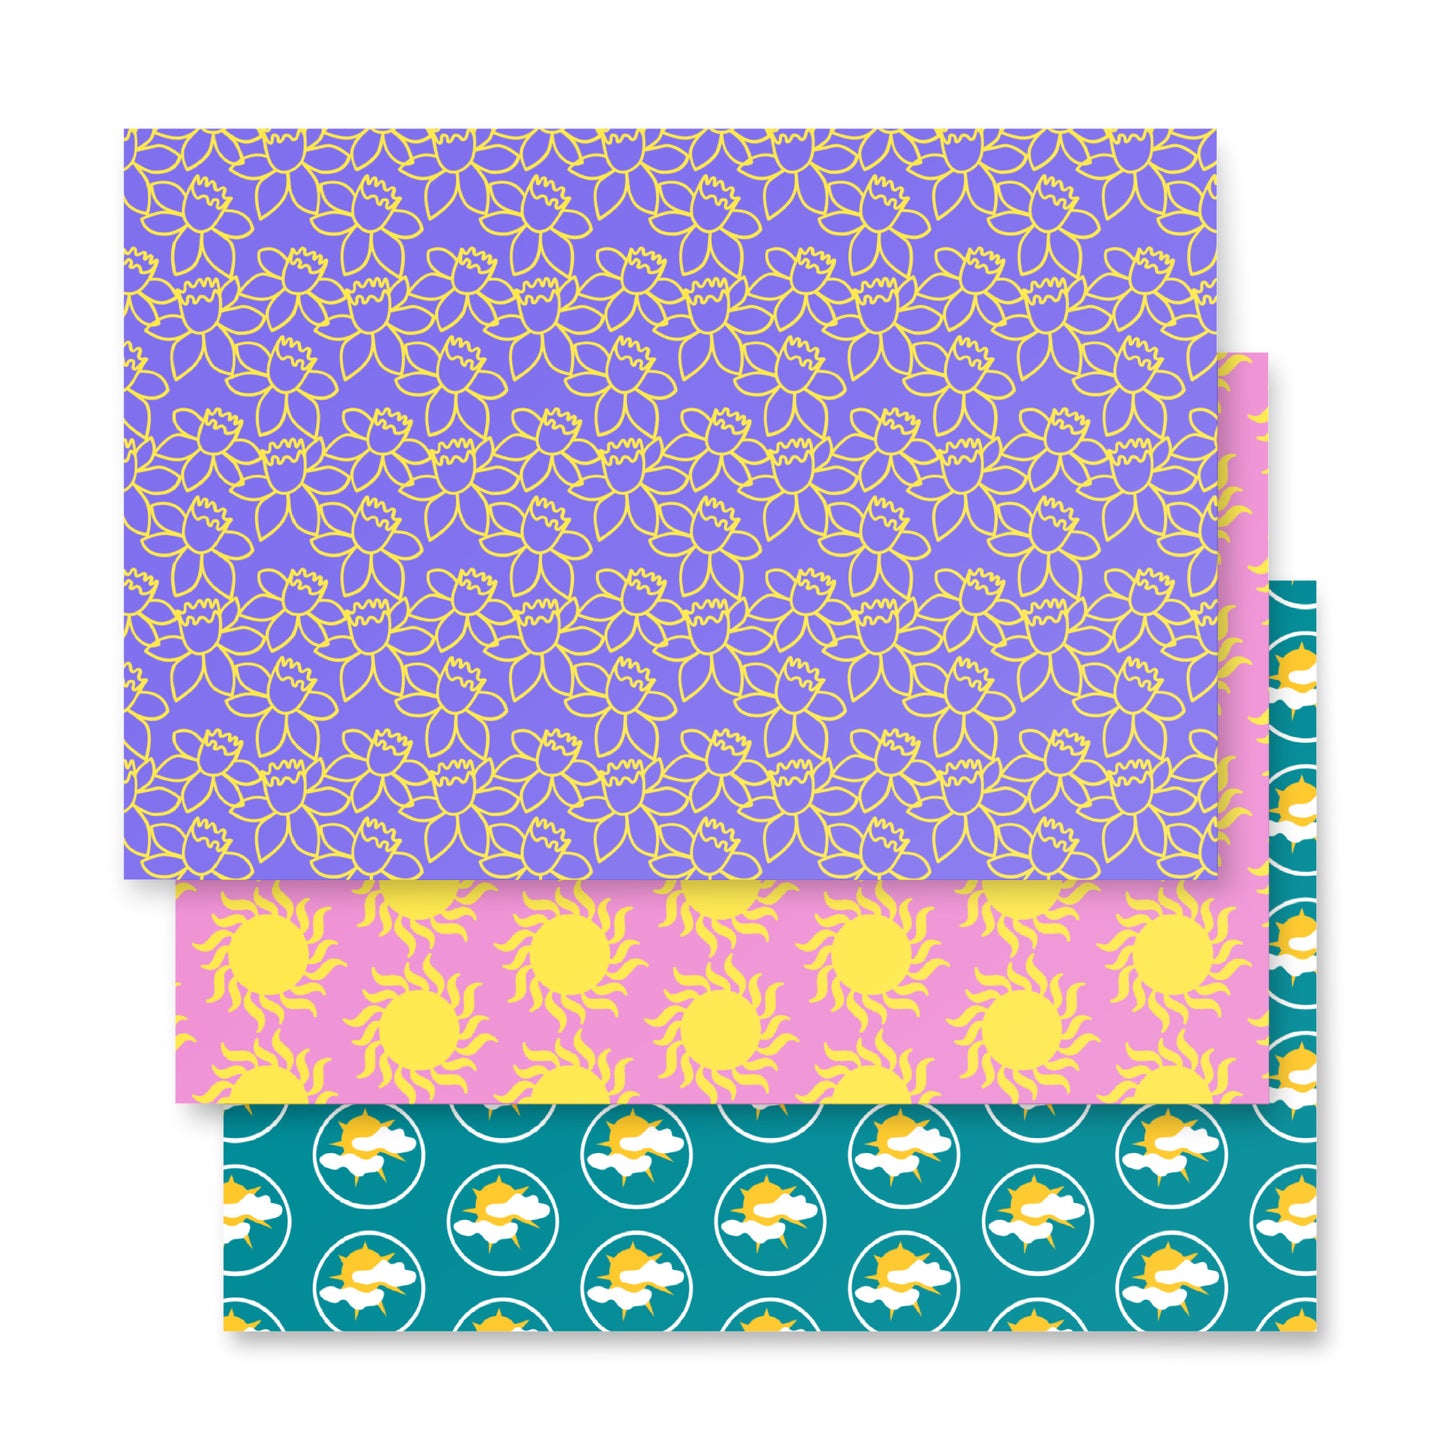 Sun/Flower/Clouds - Wrapping paper sheets ~ Sharon Dawn Collection